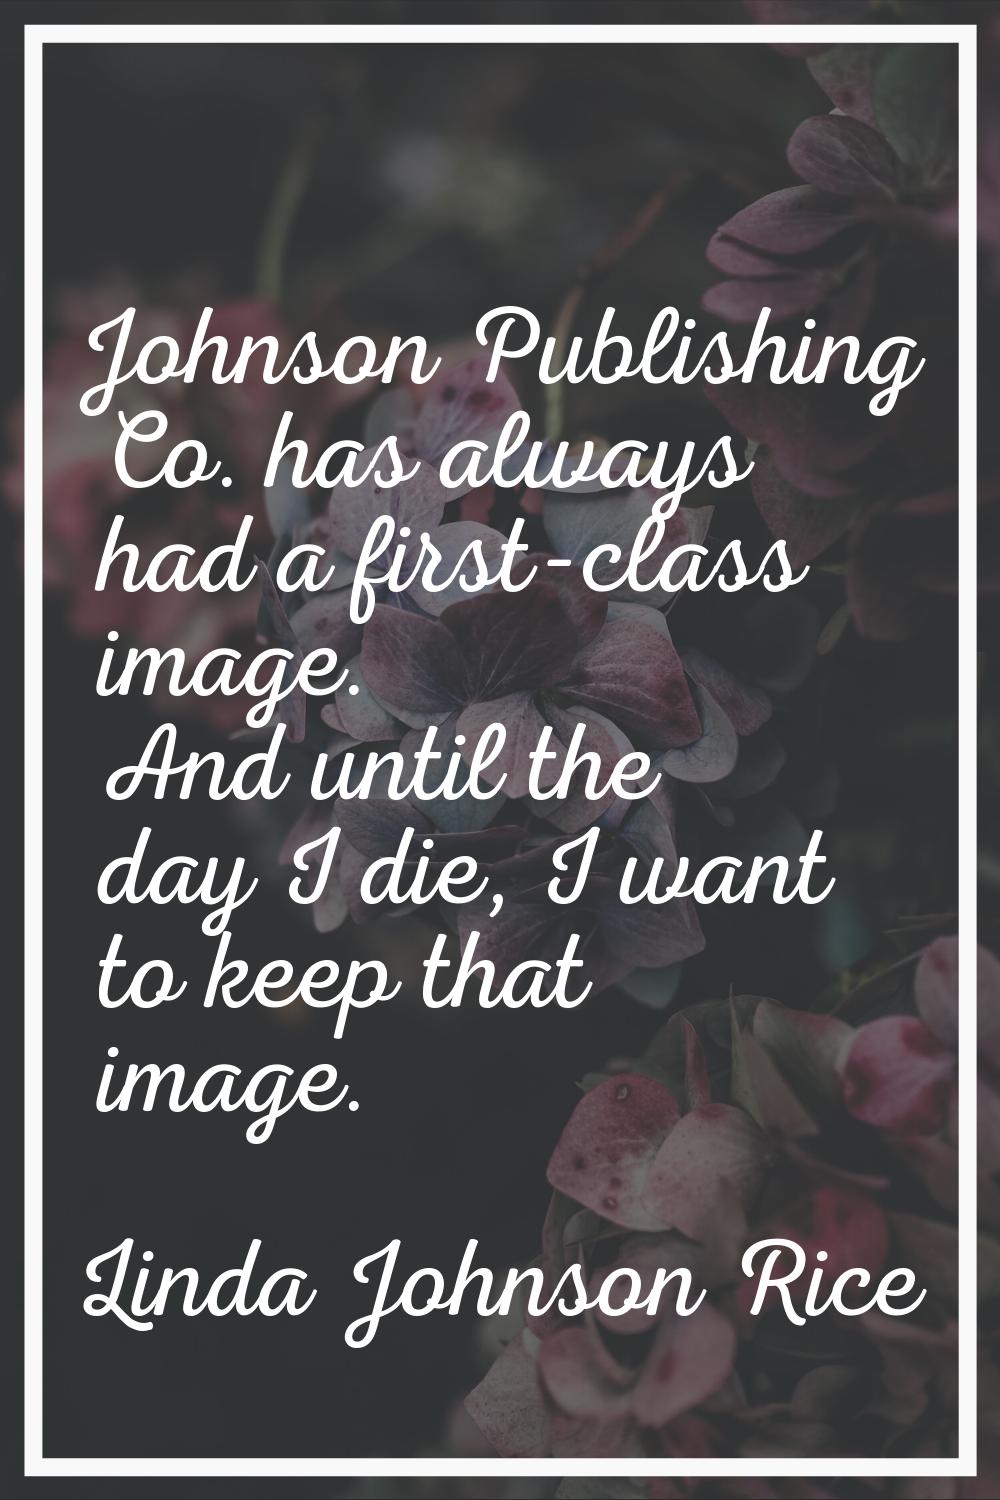 Johnson Publishing Co. has always had a first-class image. And until the day I die, I want to keep 